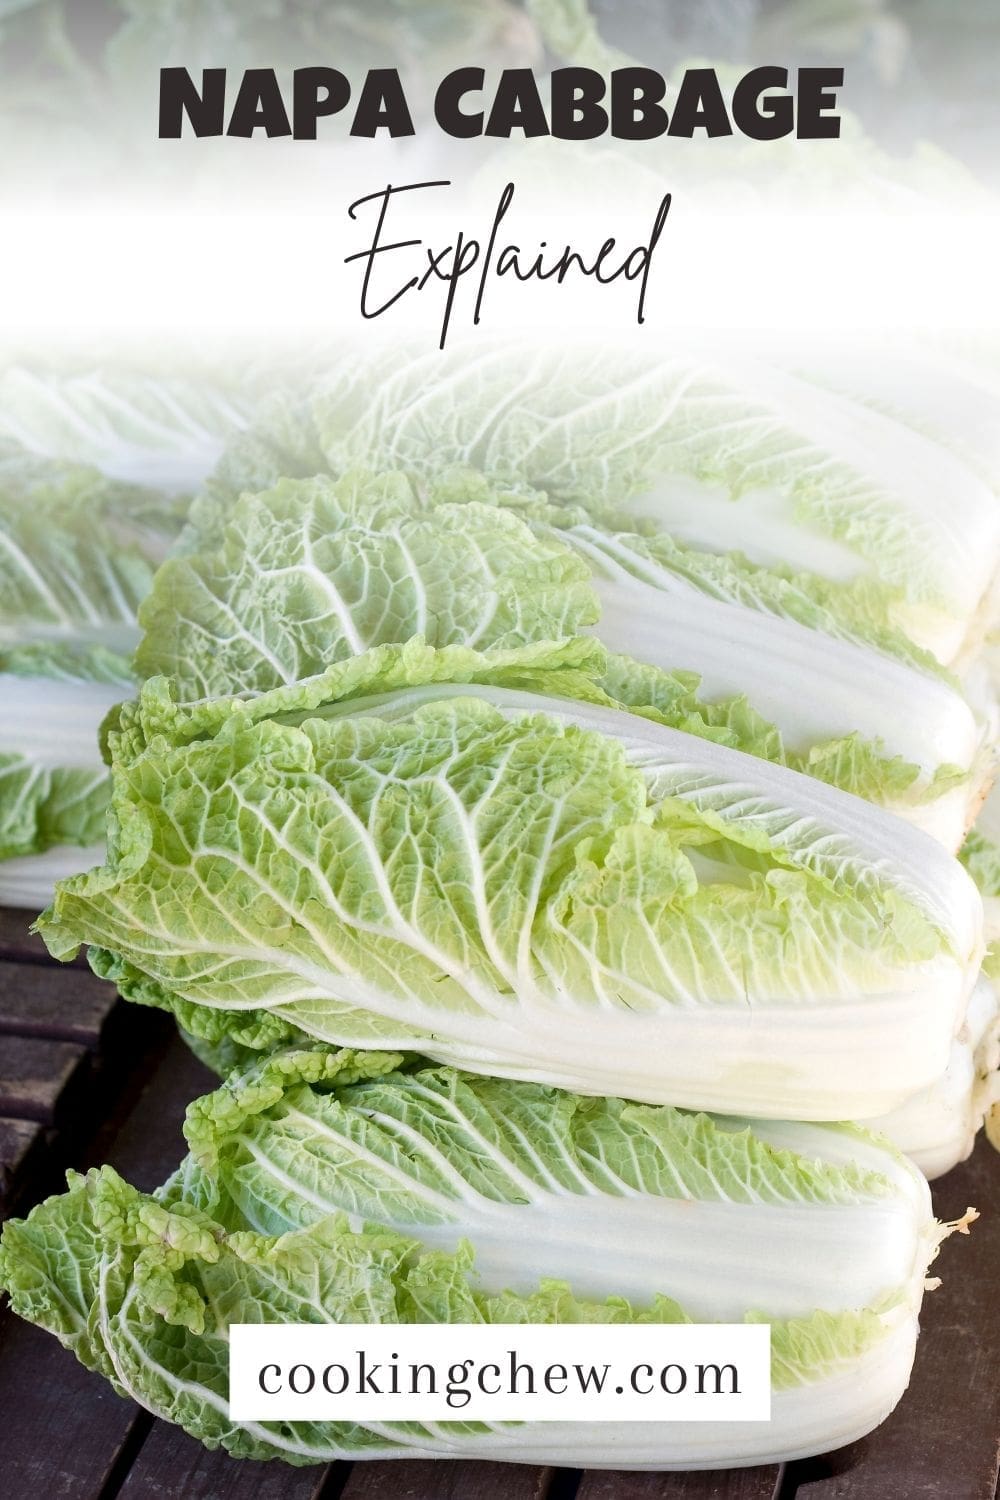 A photo of a stack of napa cabbage on a wooden table.